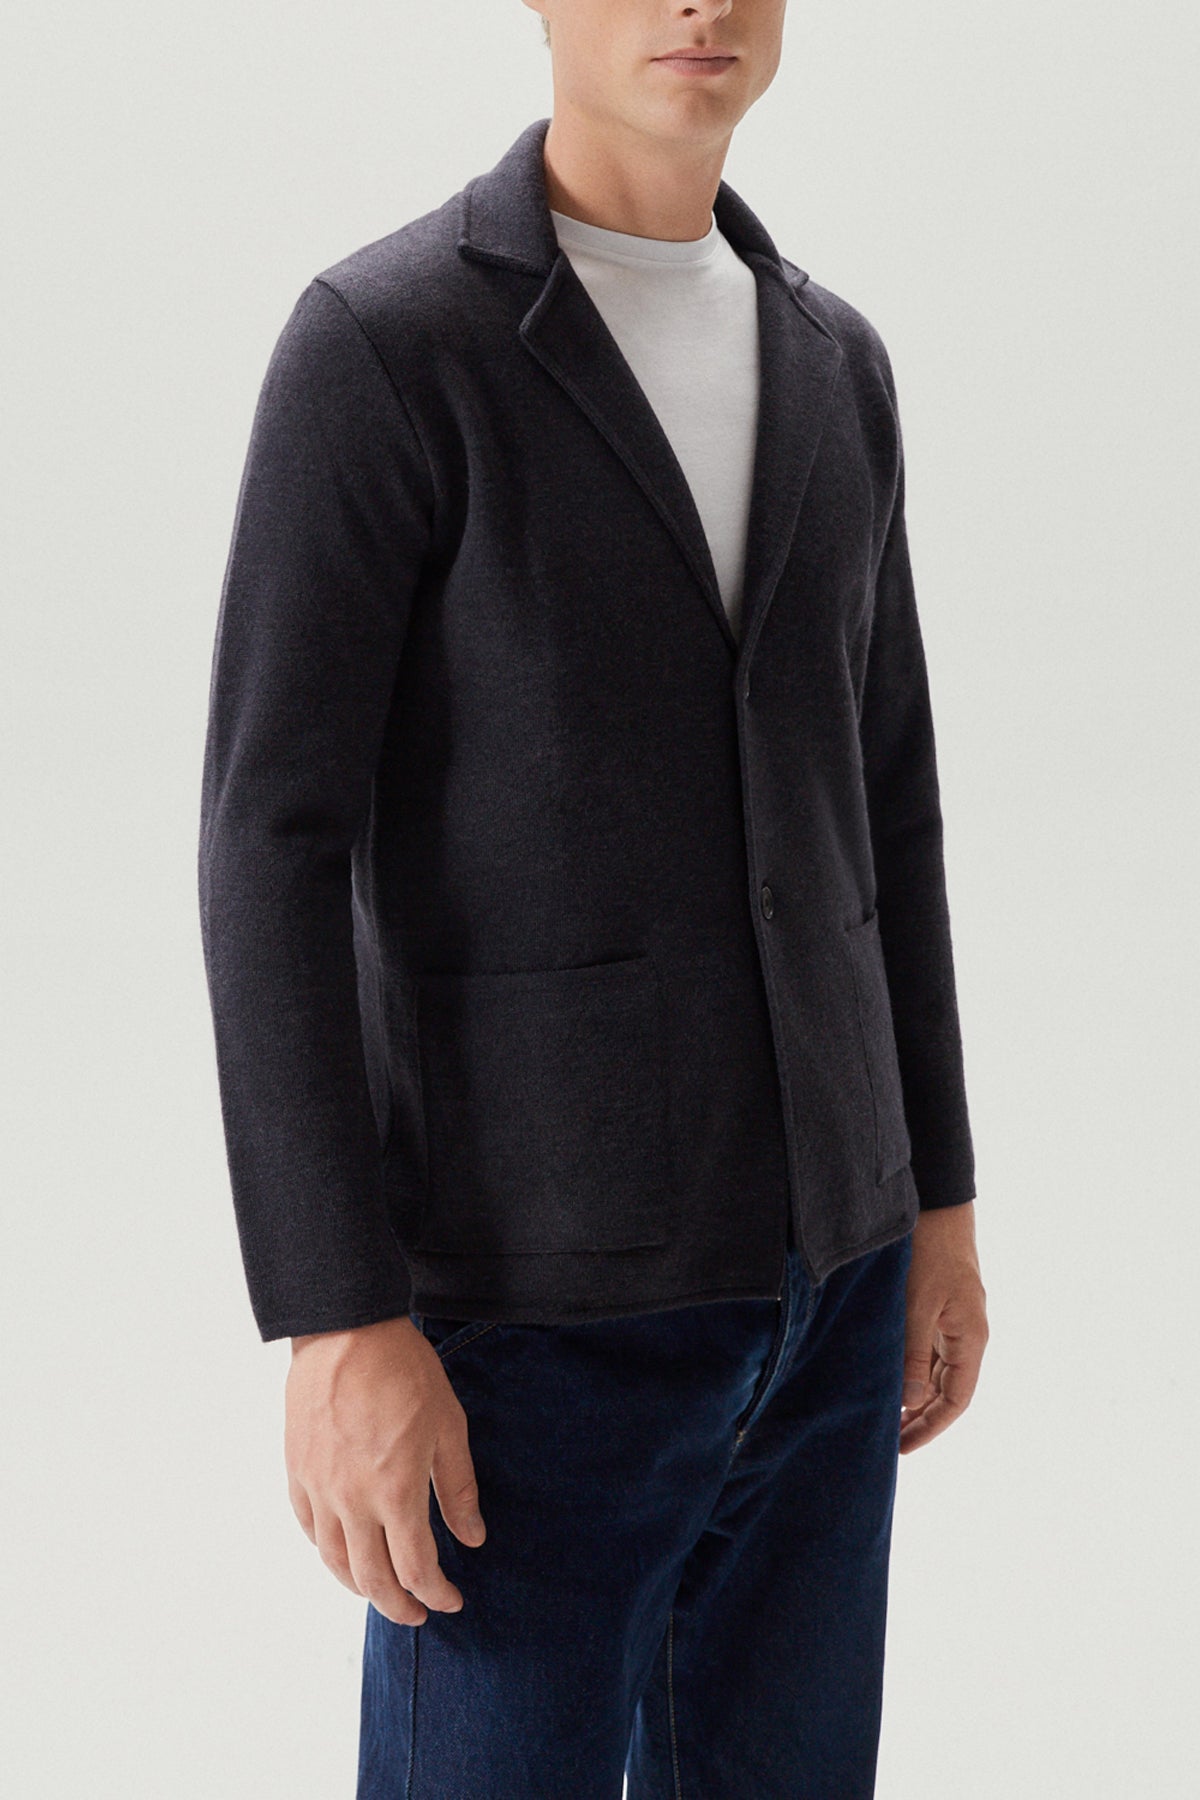 the boiled wool blazer imperfect version anthracite grey